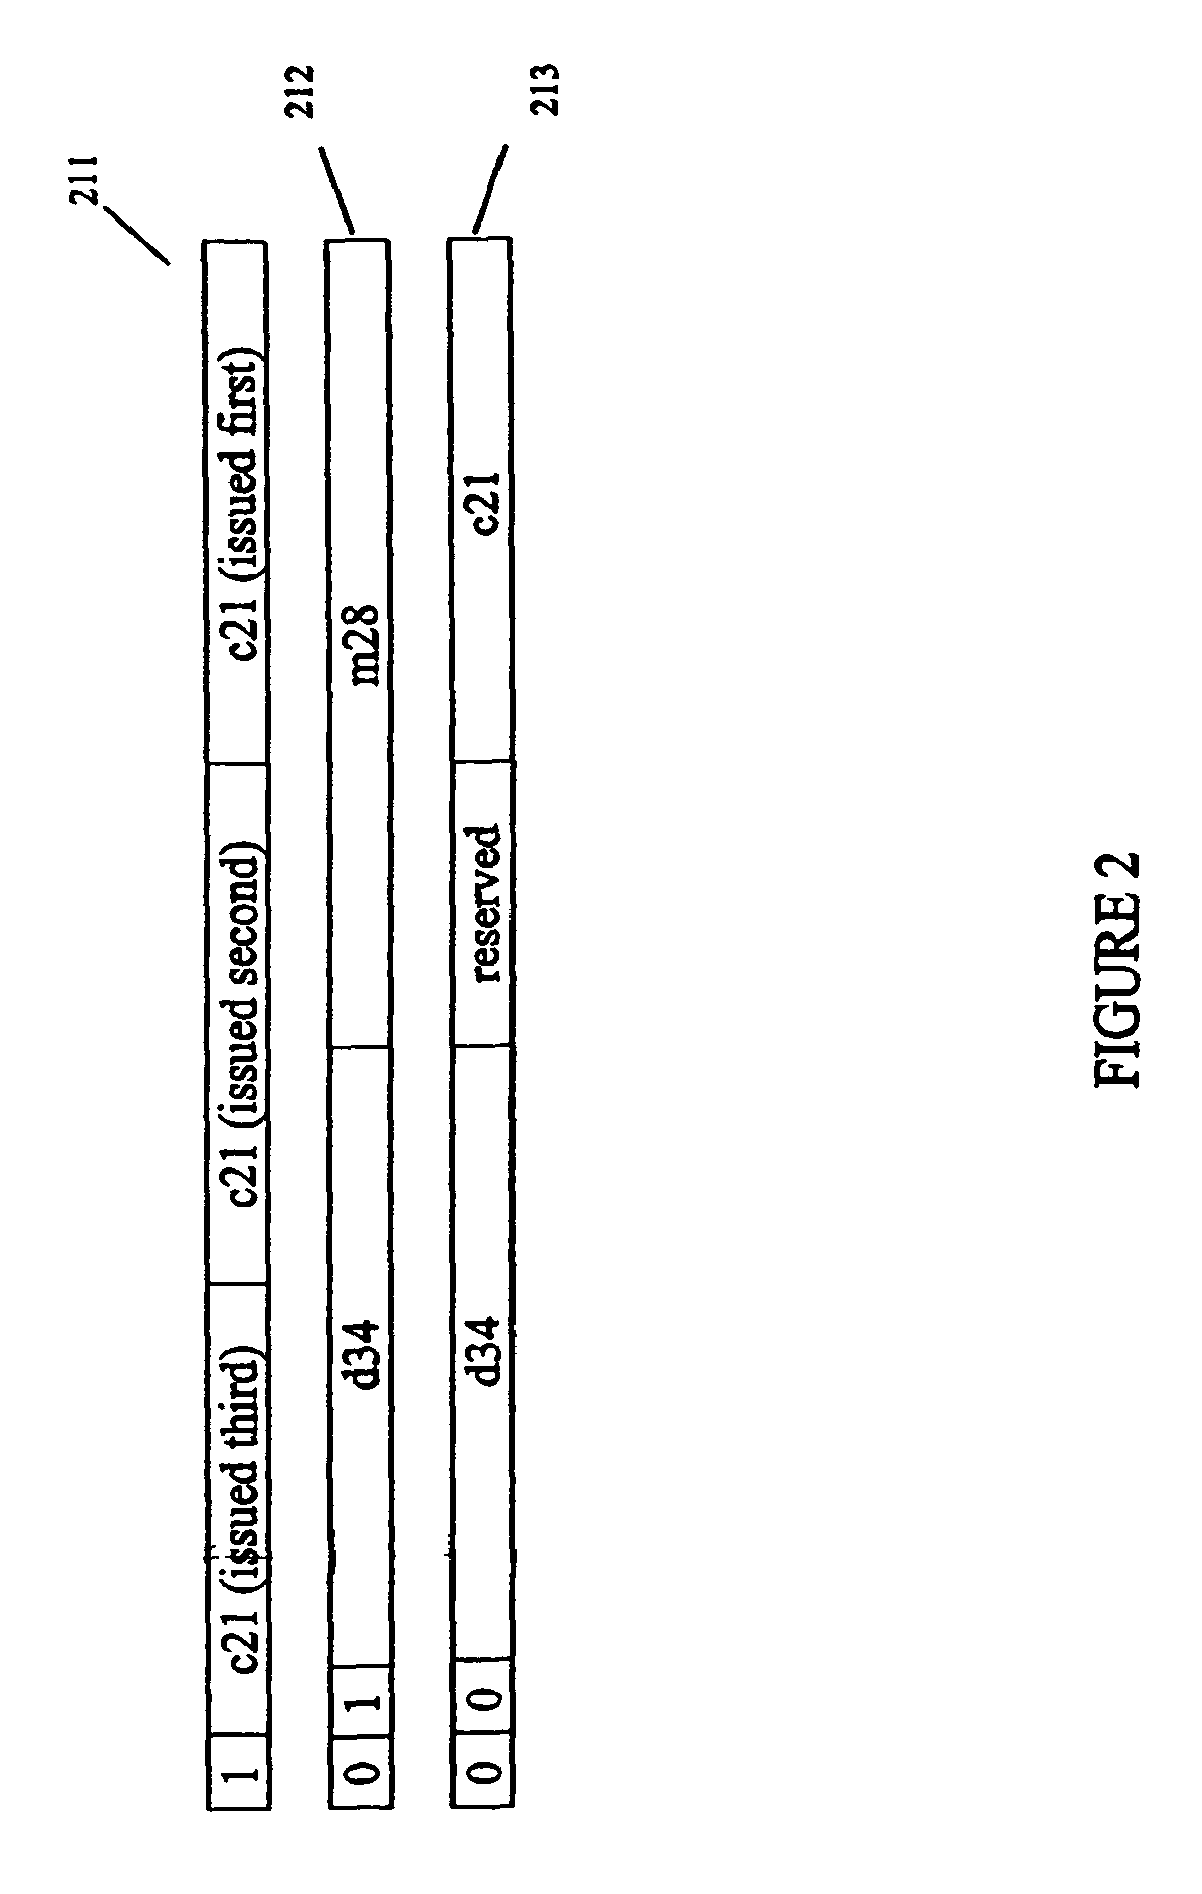 Apparatus and method for asymmetric dual path processing